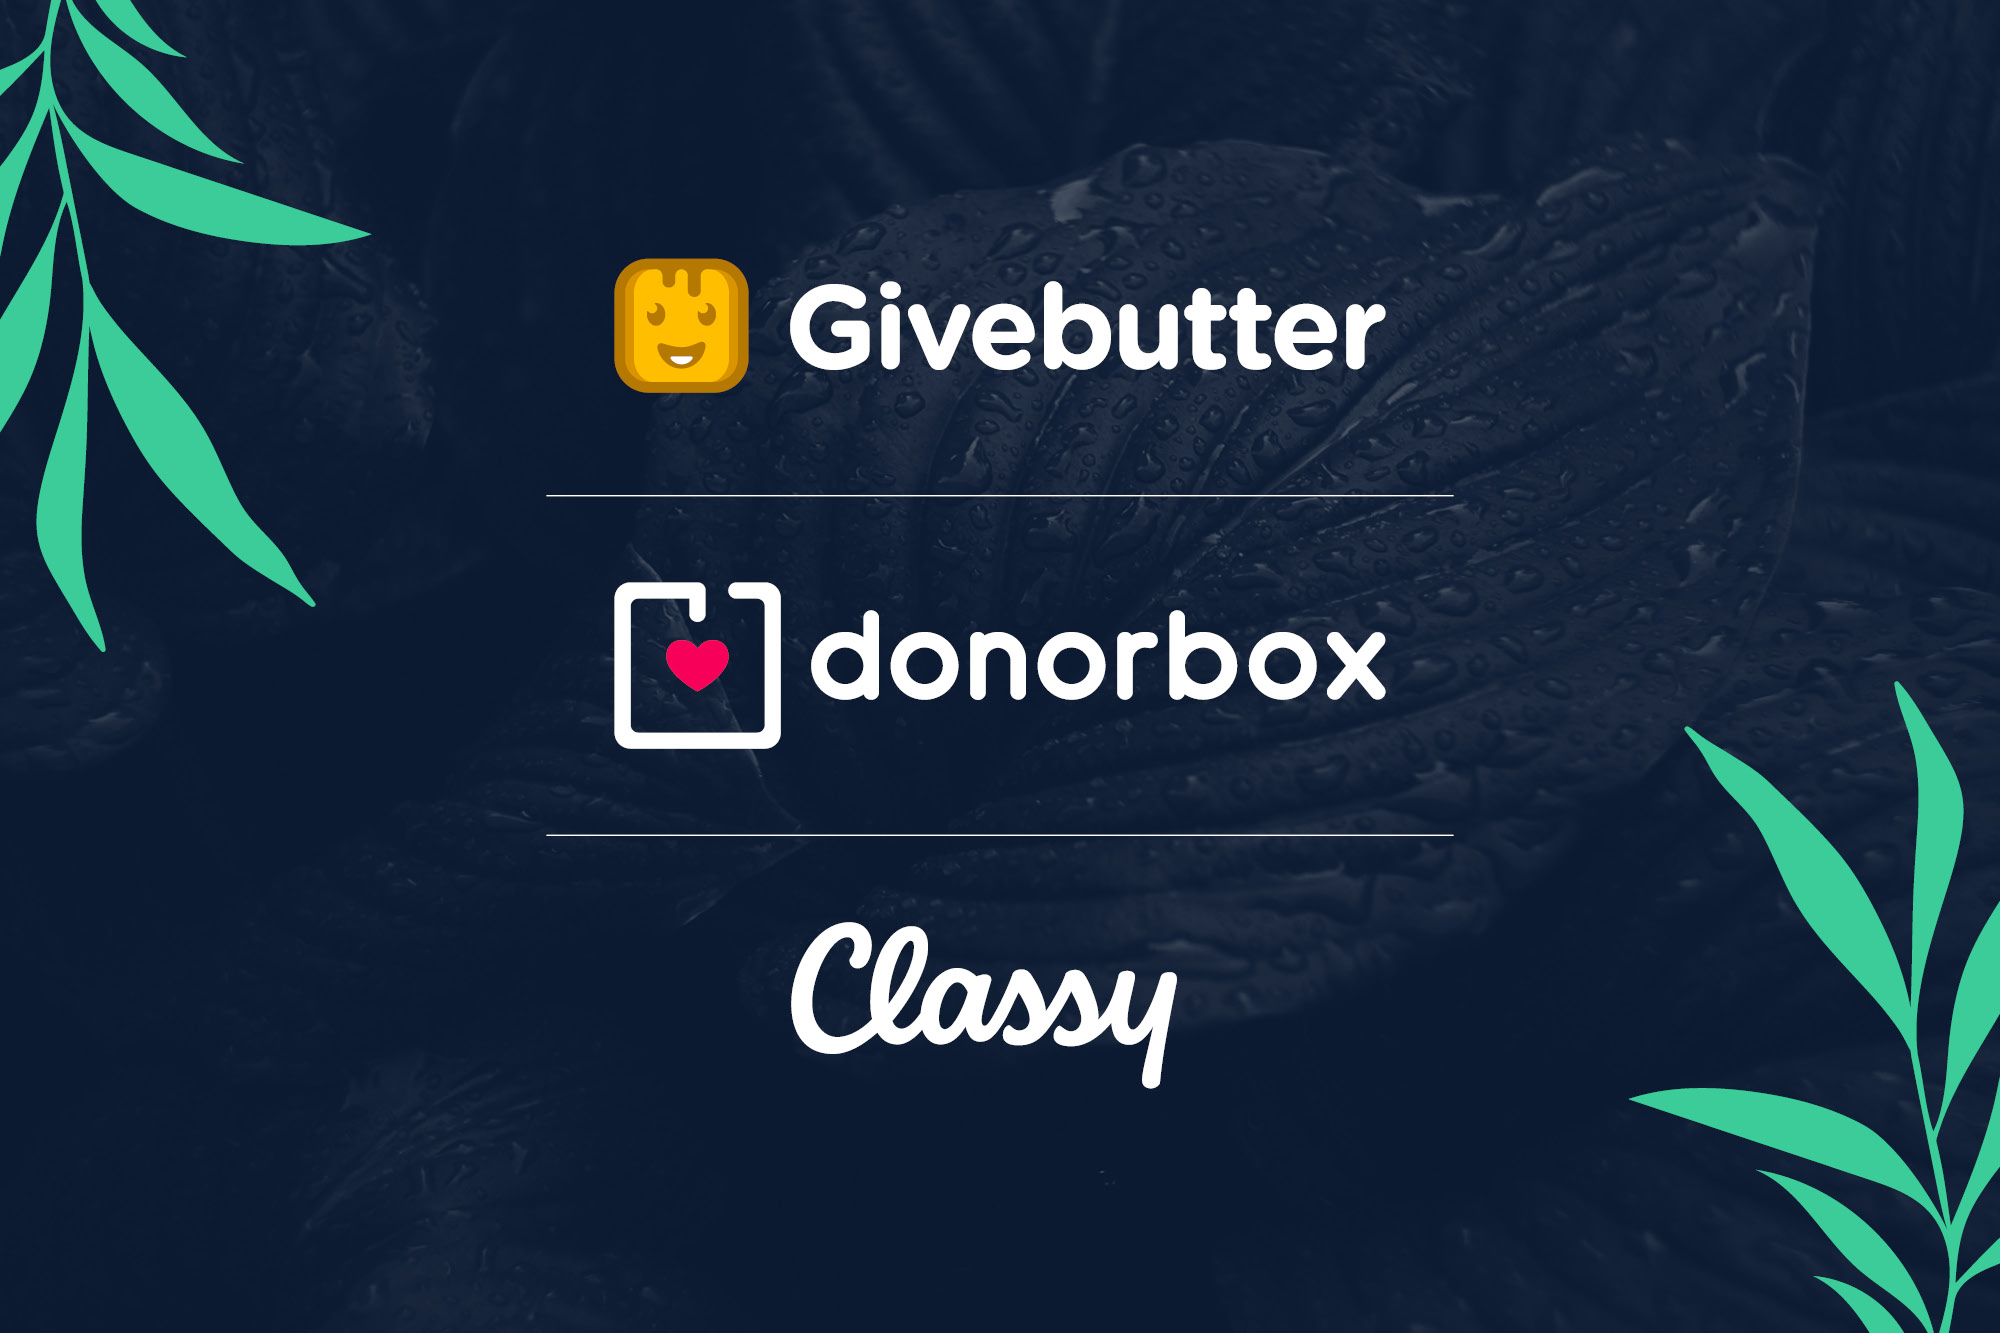 Fundraising Platforms: Givebutter, donorbox, Classy